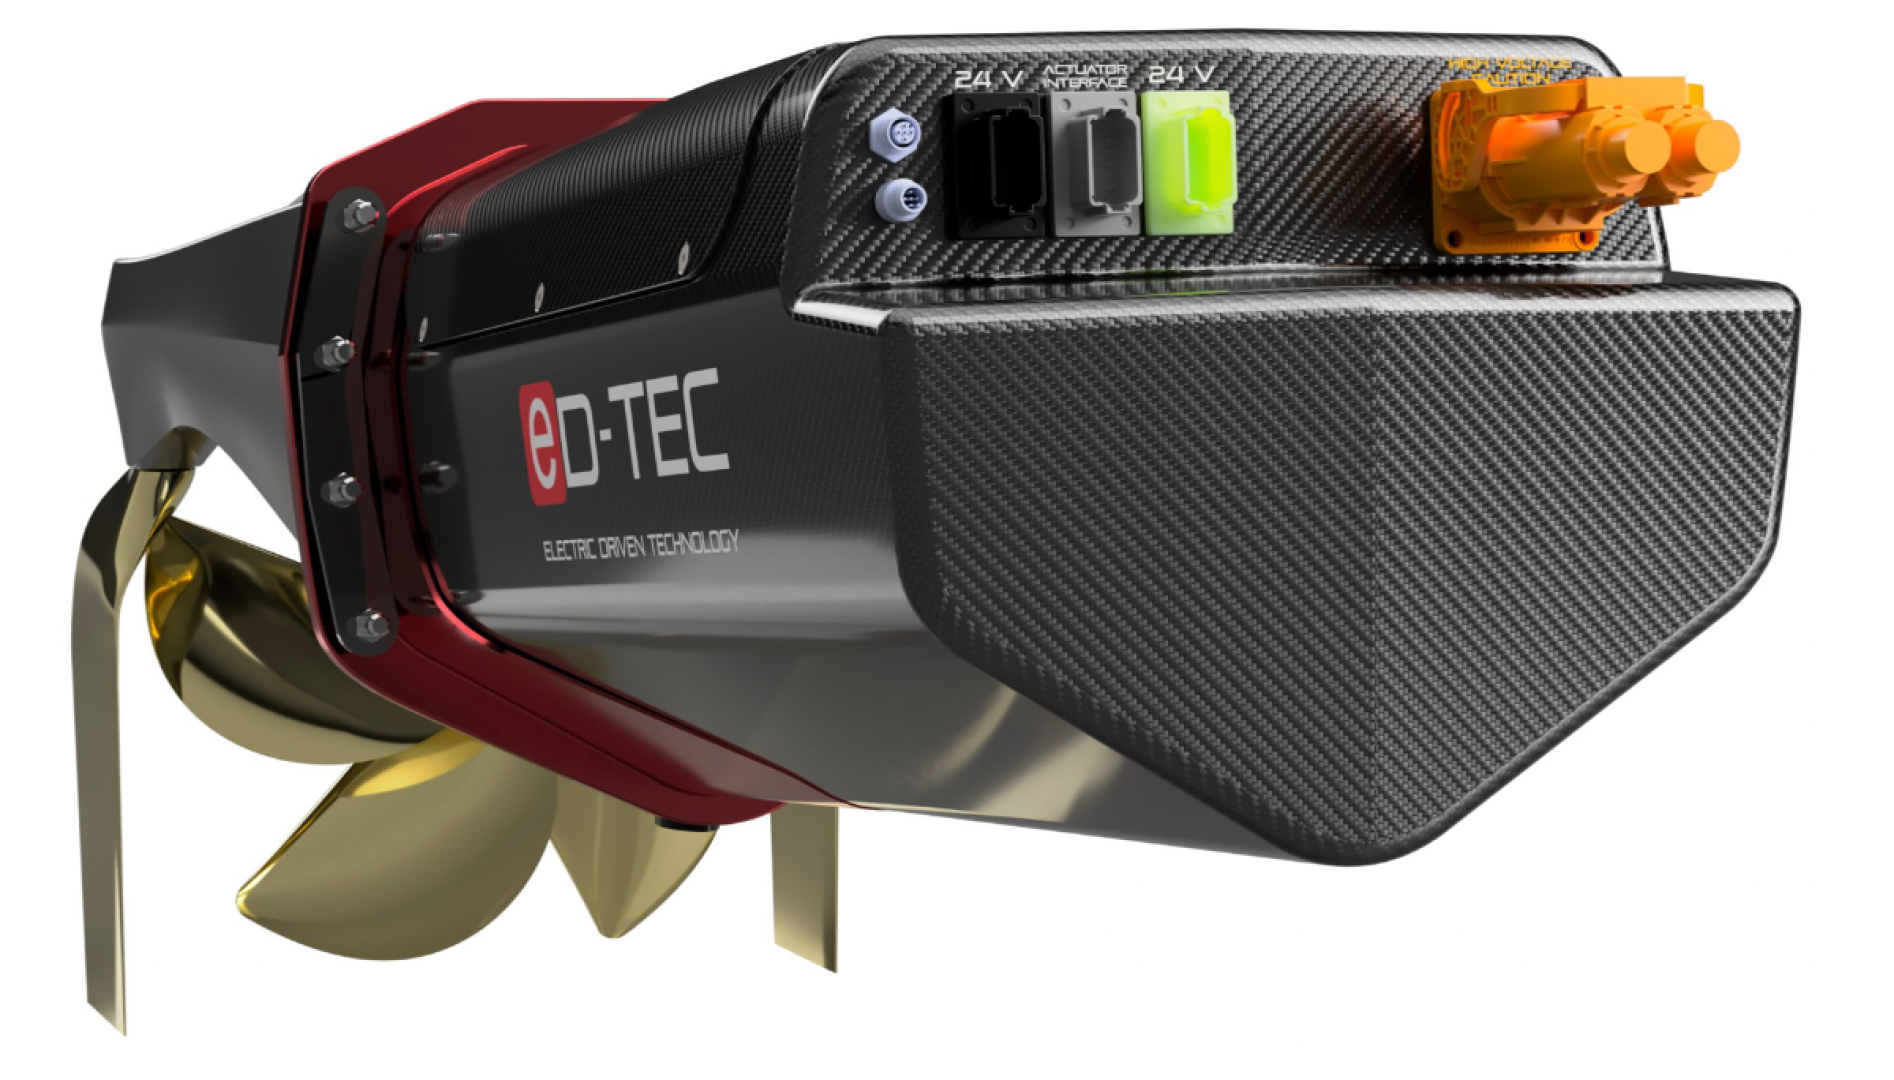 From software to sea: eD-TEC showcases
the technology behind its pioneering eD-QDrive scalable electric drive system during METS 2022